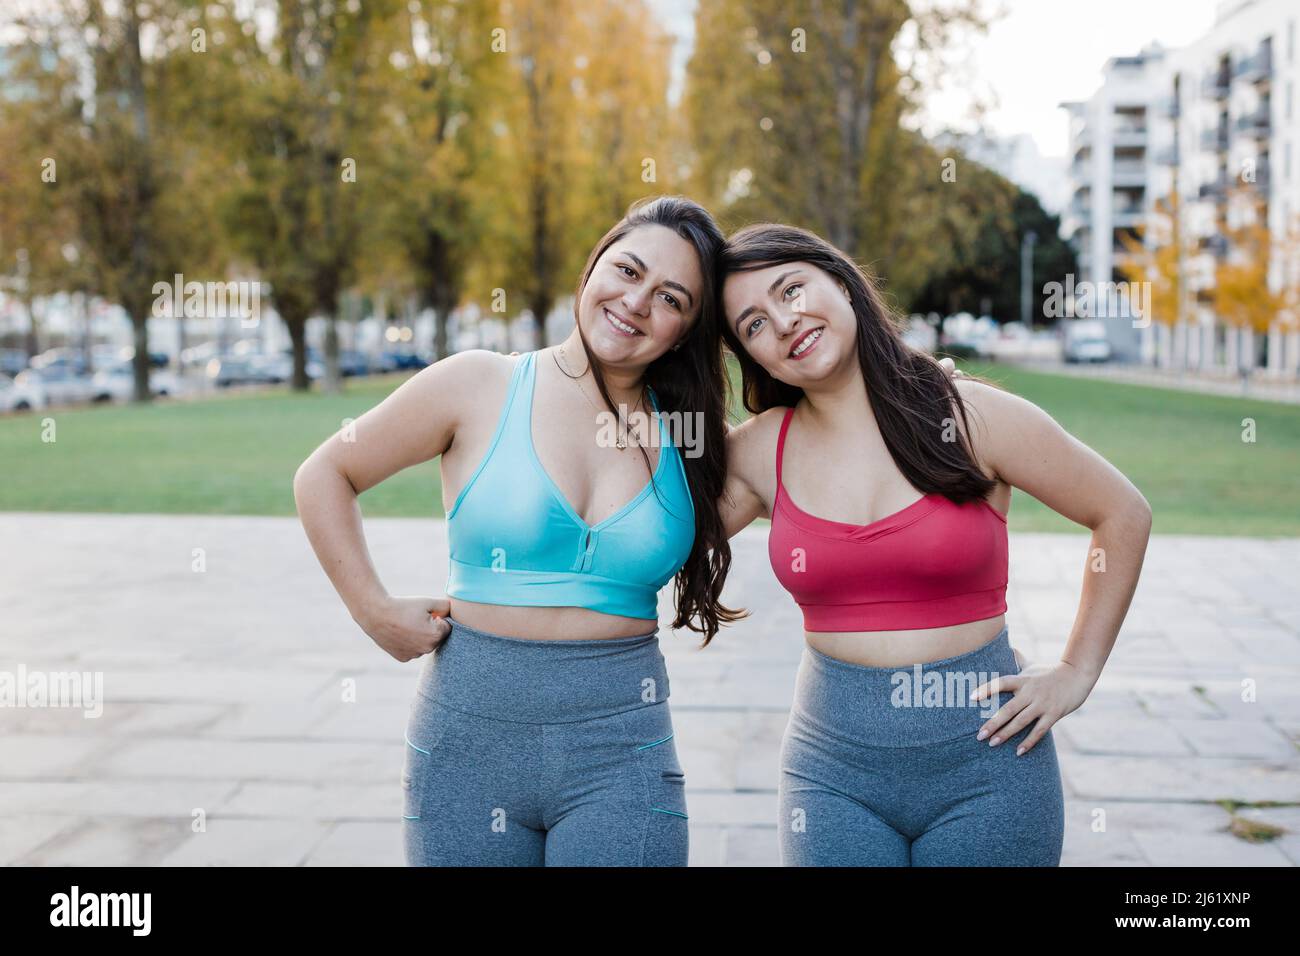 Smiling women in sports bra standing at public park Stock Photo